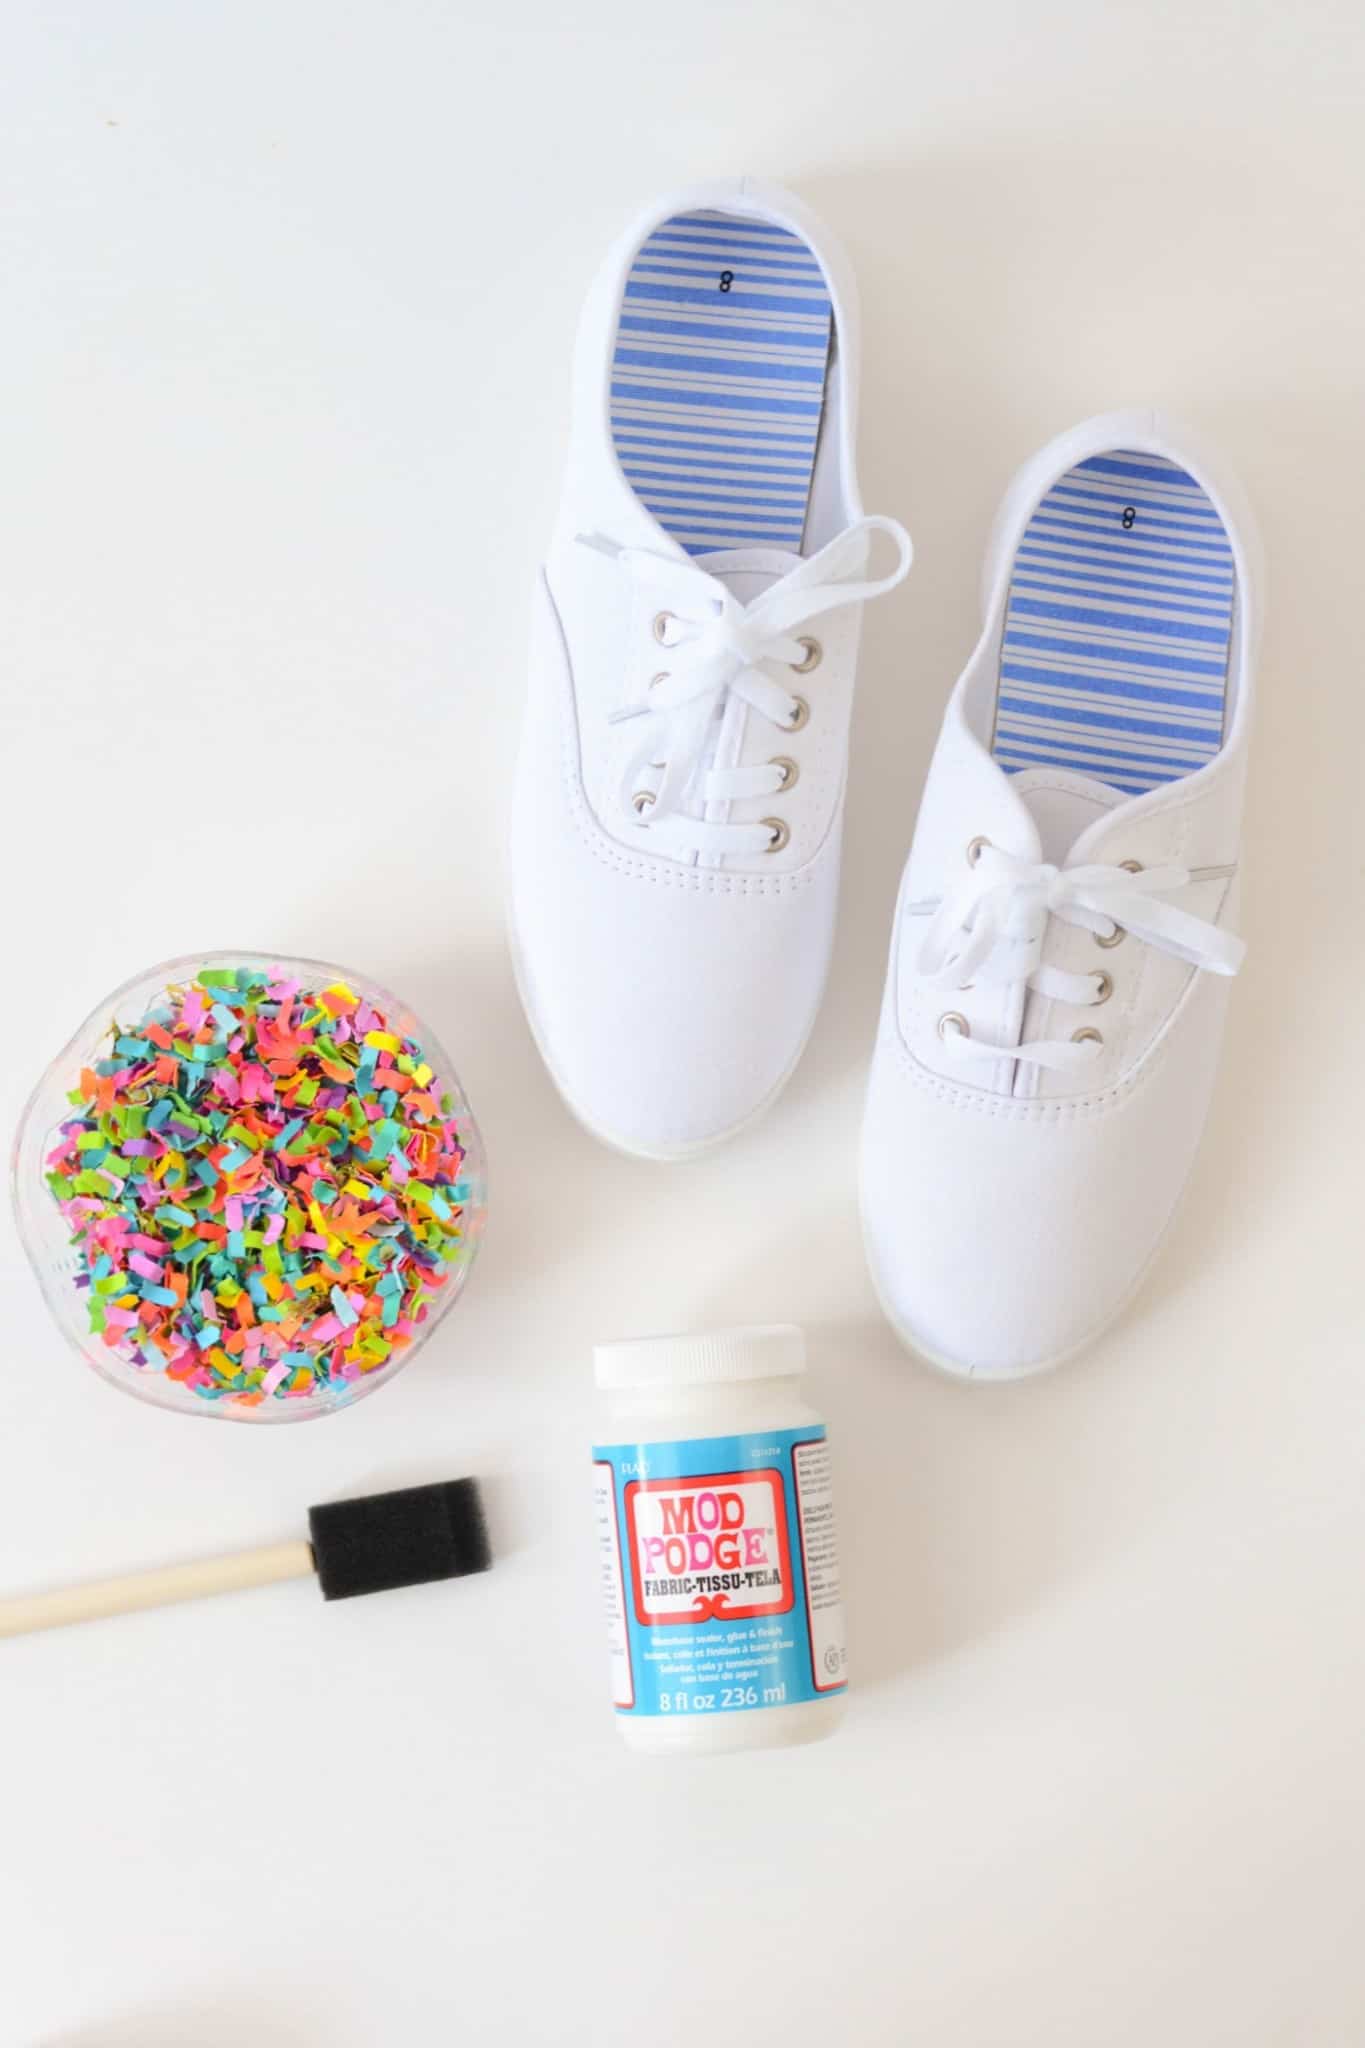 Bowl of confetti, white shoes, Mod Podge Fabric, and a foam brush